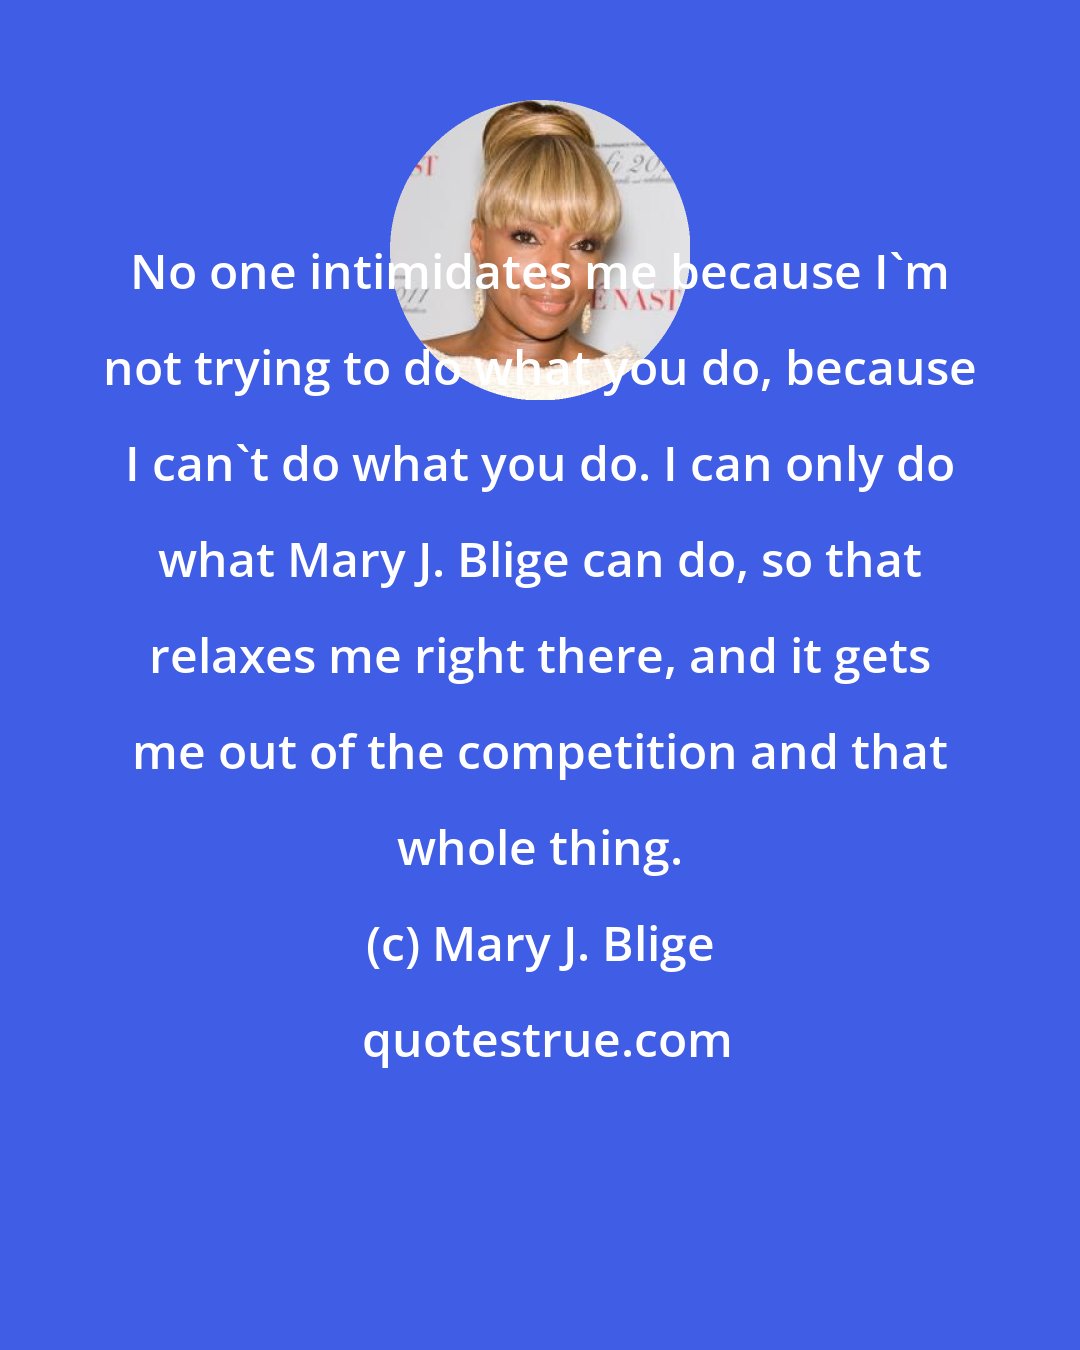 Mary J. Blige: No one intimidates me because I'm not trying to do what you do, because I can't do what you do. I can only do what Mary J. Blige can do, so that relaxes me right there, and it gets me out of the competition and that whole thing.